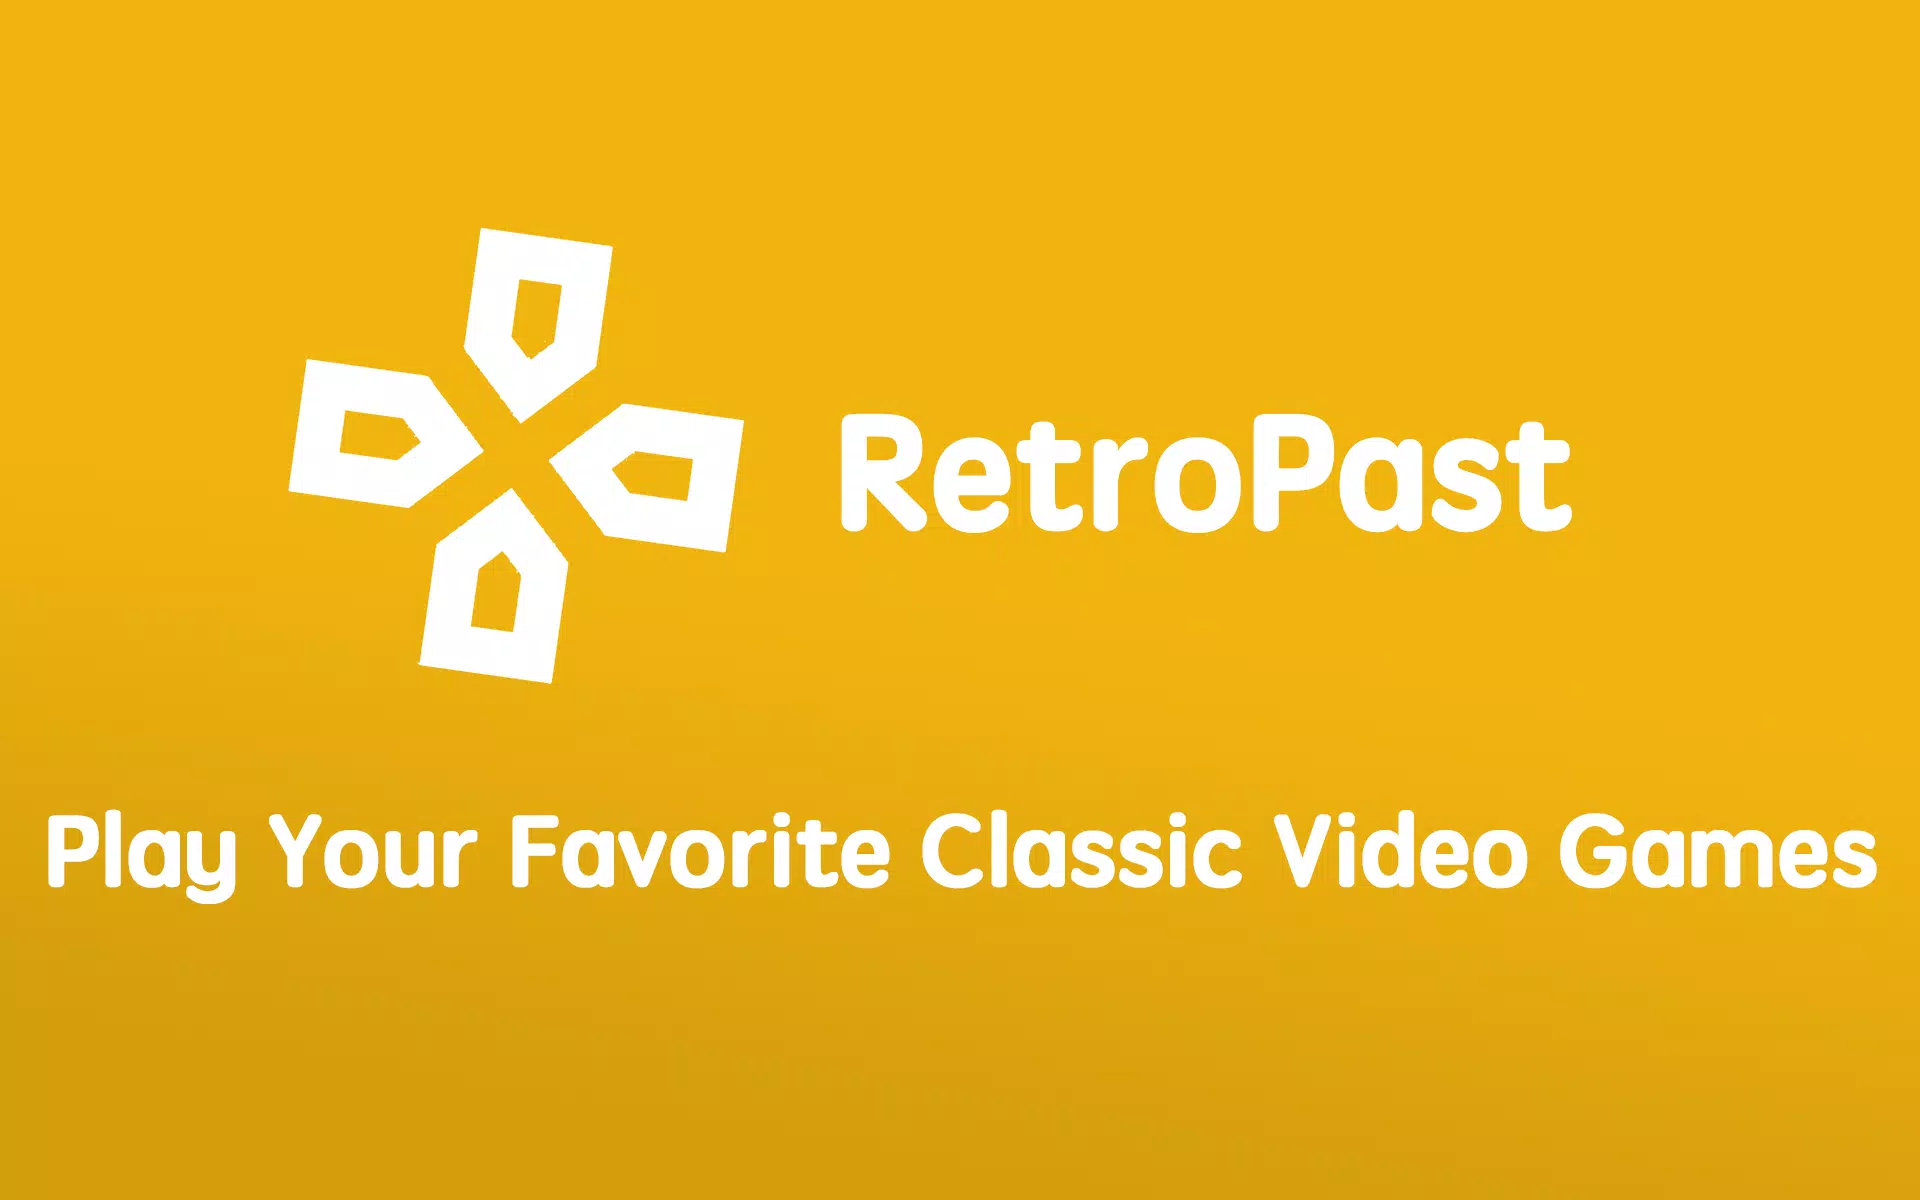 What is New Yorks Favorite Retro Video Game?